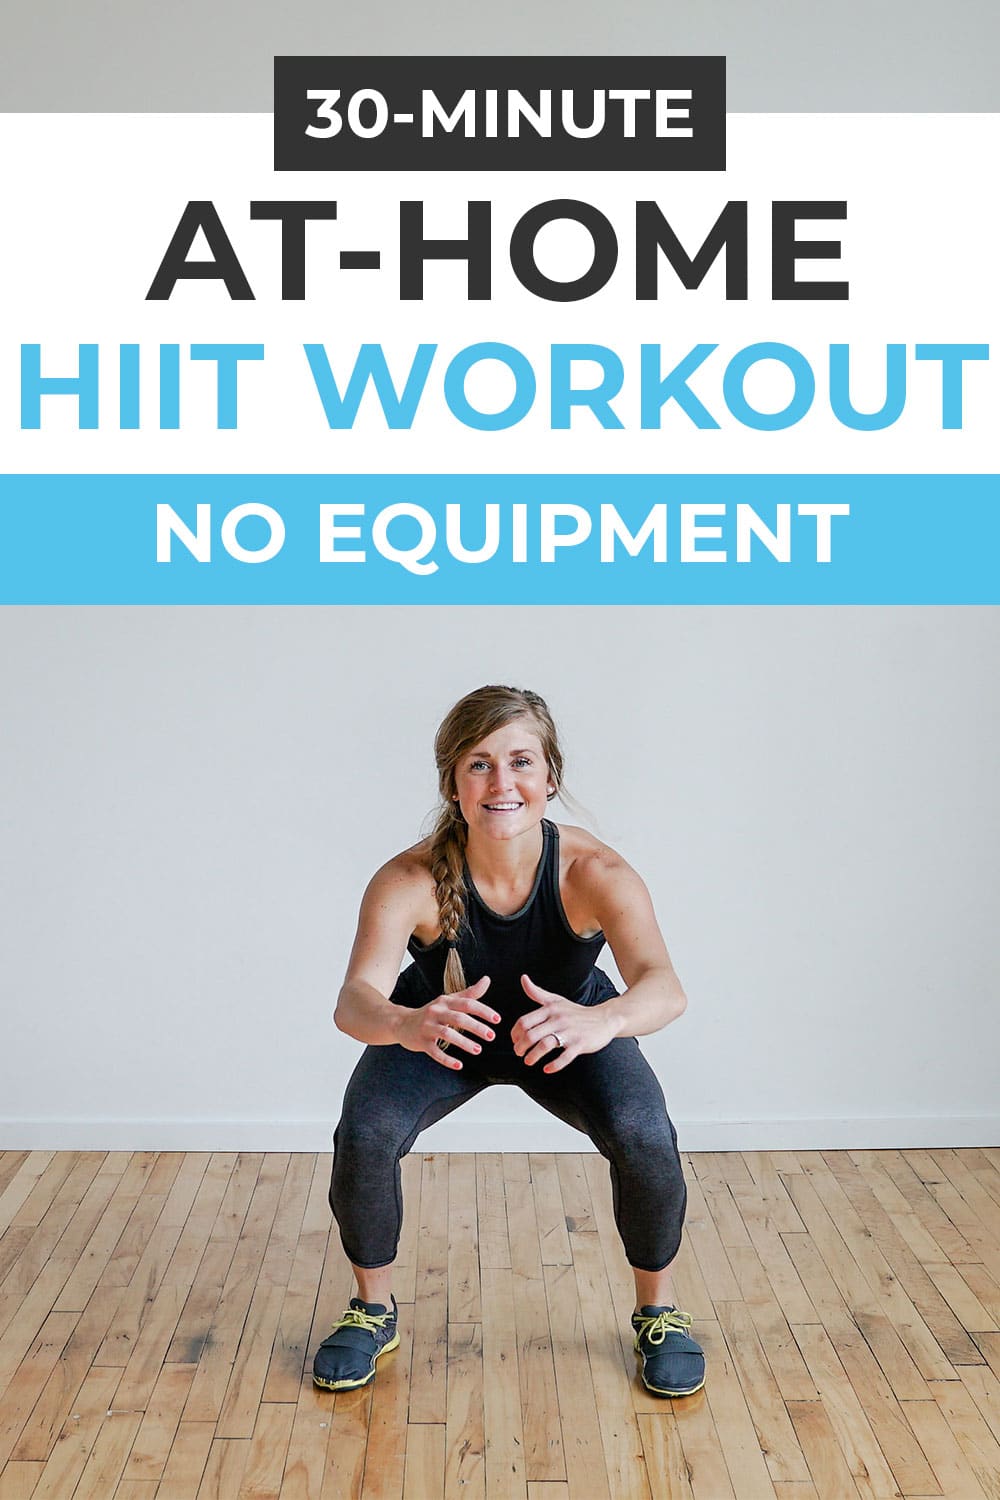  Hiit Training At Home Without Equipment for Beginner